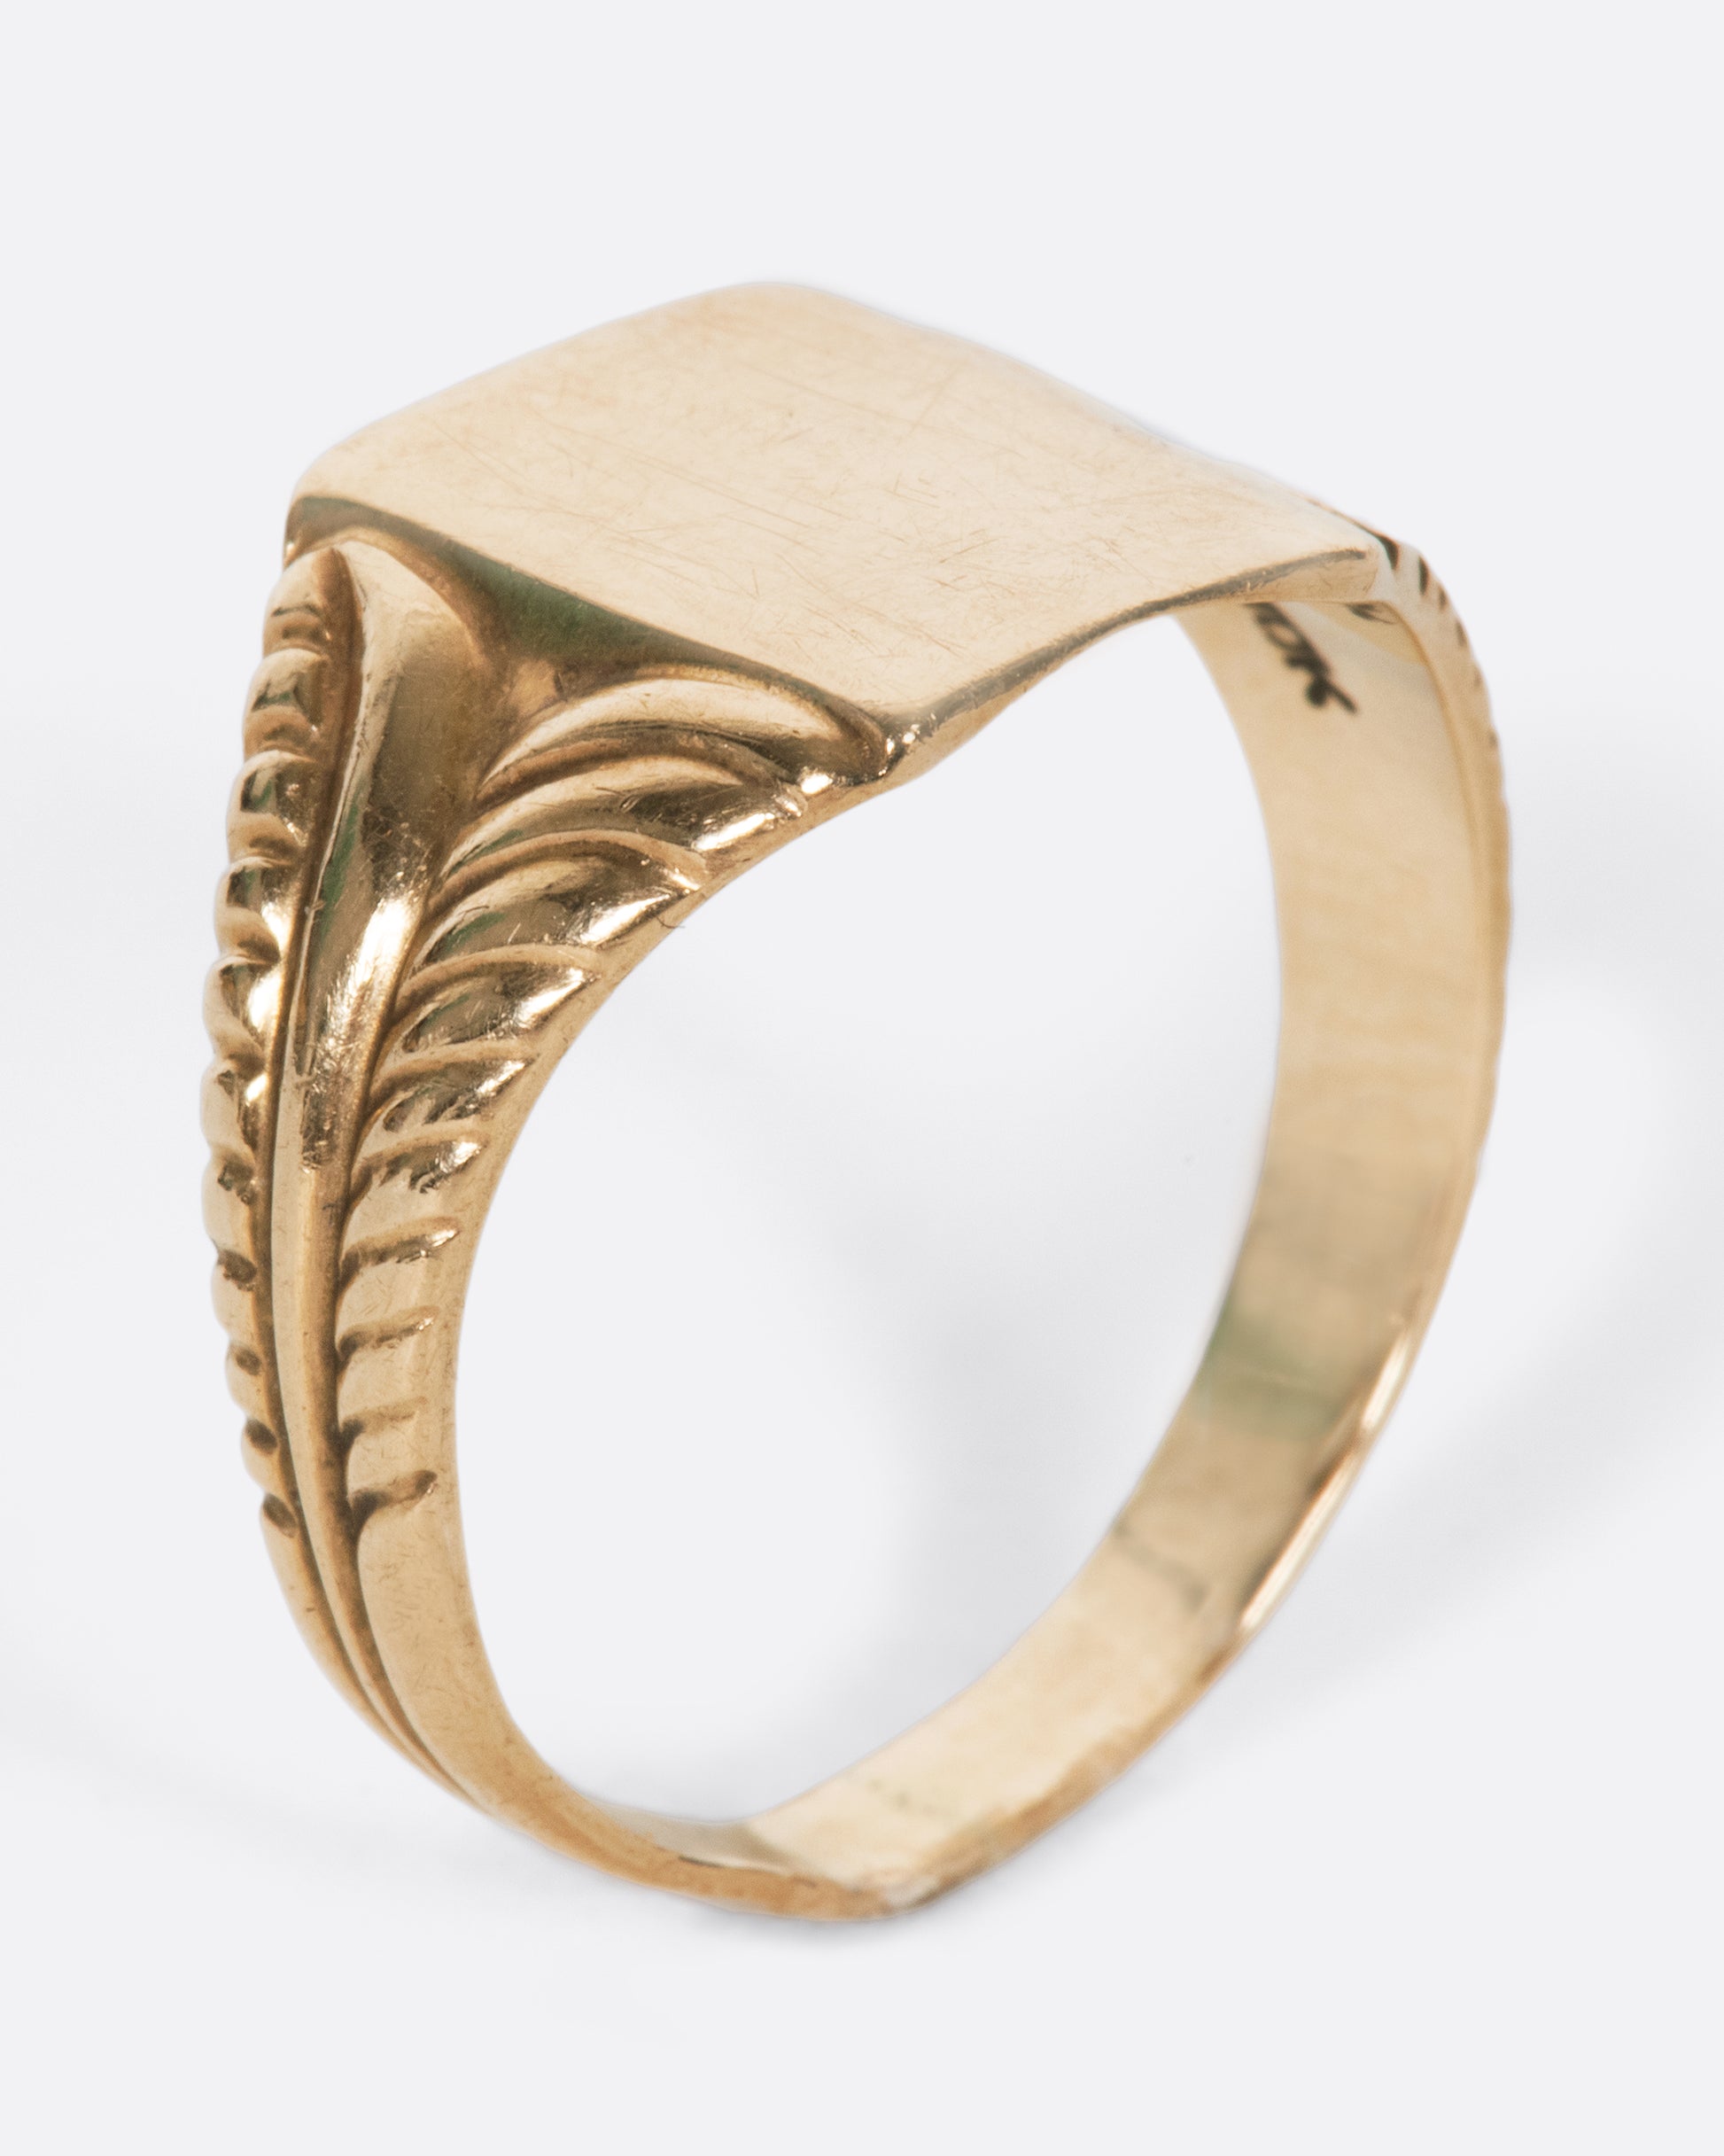 A vintage yellow gold rectangular signet ring with textured shoulders and a blank face.